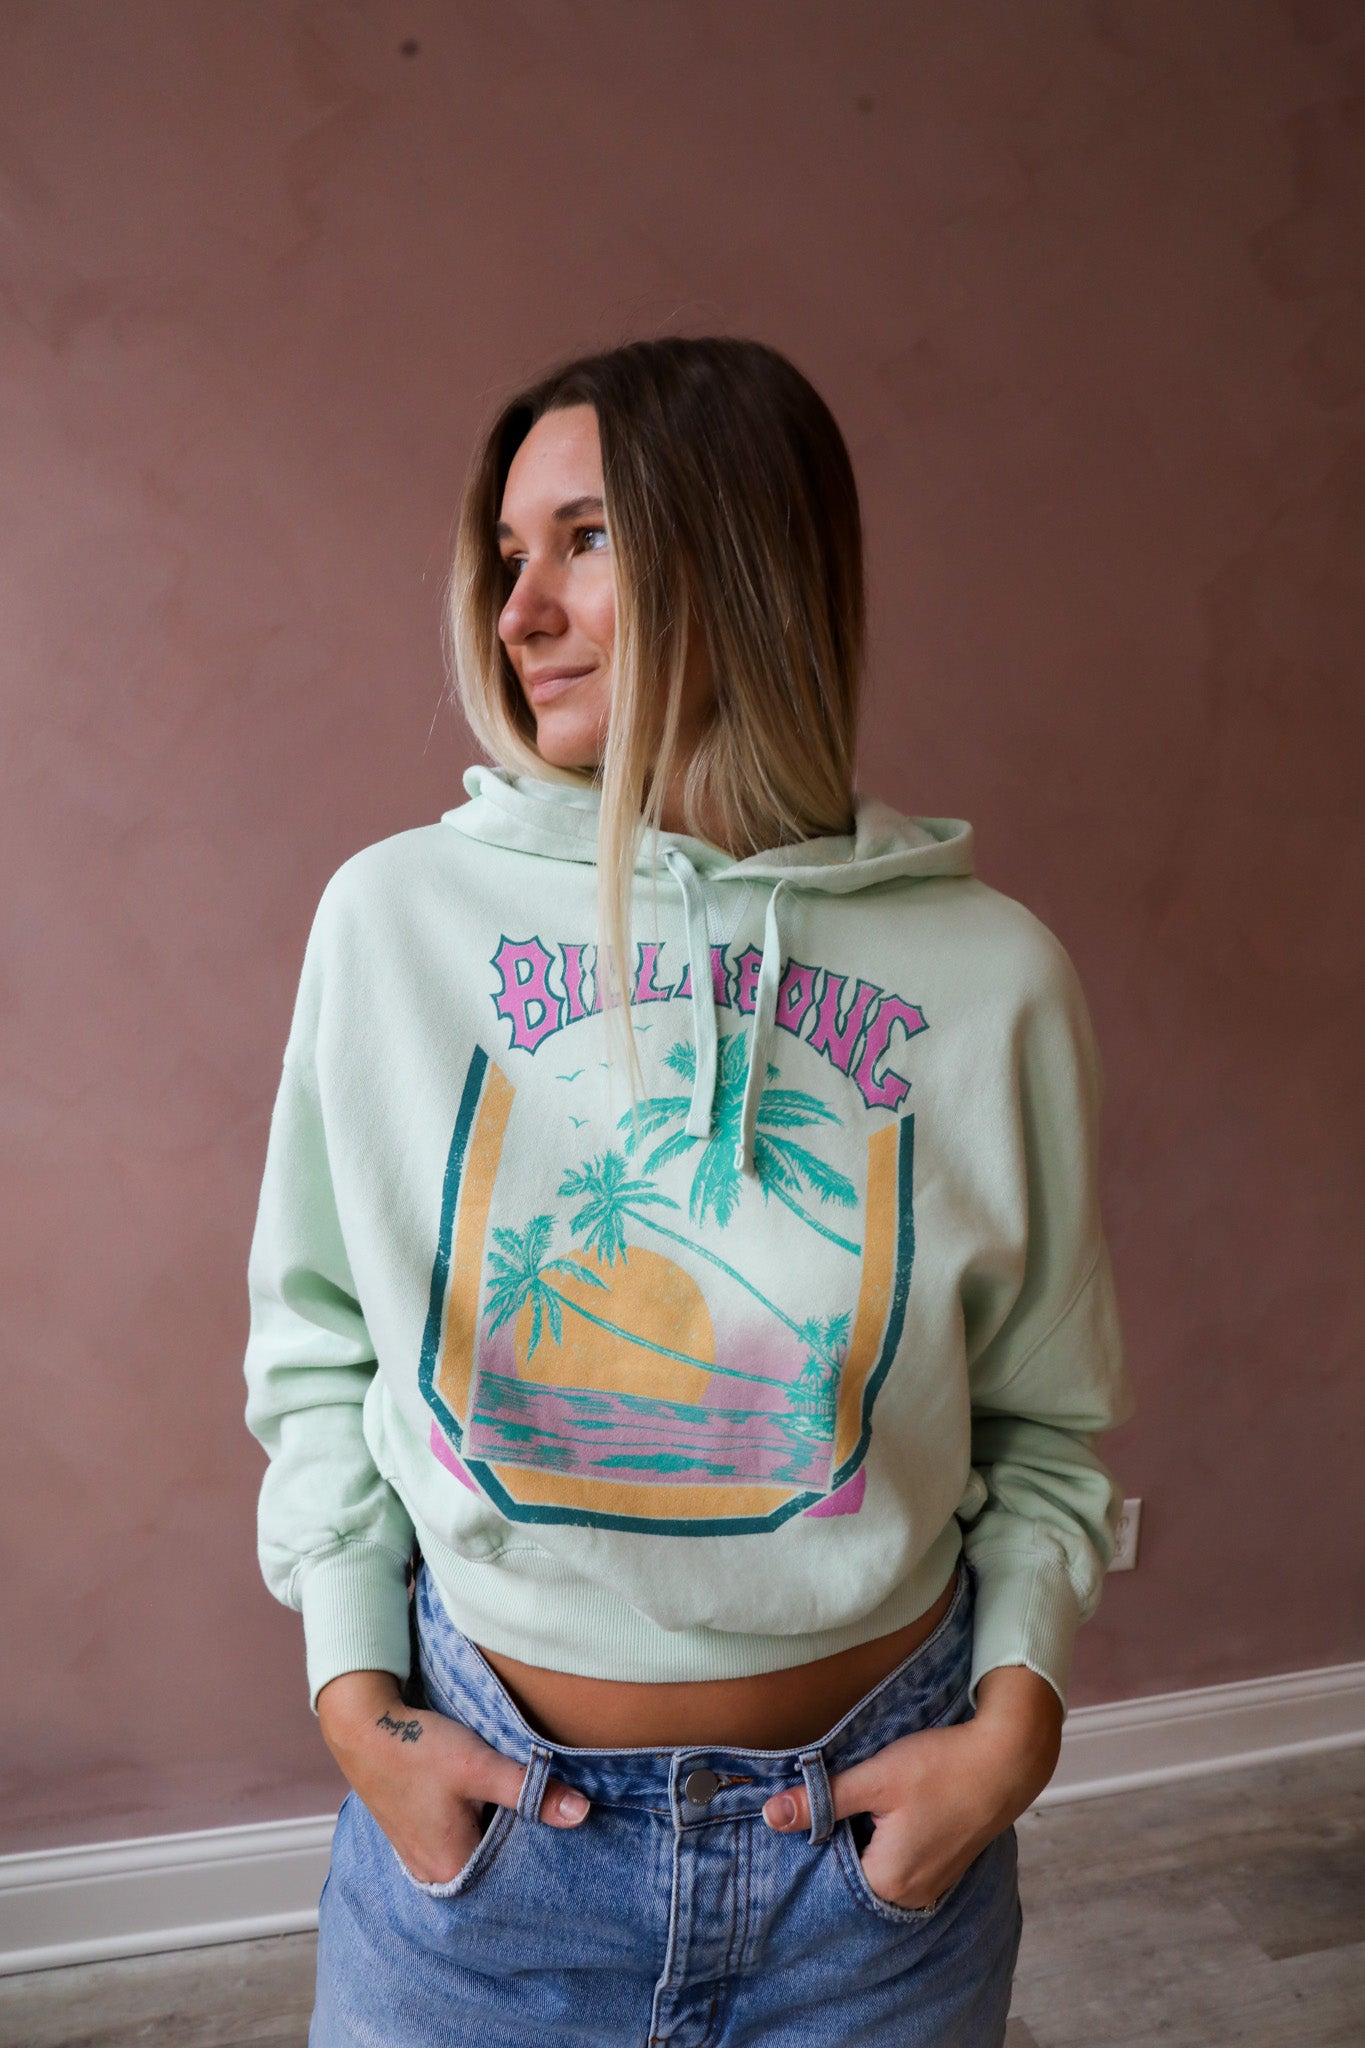 Cropped and cozy, the All Time Hoodie from Billabong's Trip Around The Sun collection is crafted of blended cotton fabric for a super-soft feel. This sweatshirt has a boxy fit with assorted graphics on the chest and ribbing at the cuffs and bottom hem.